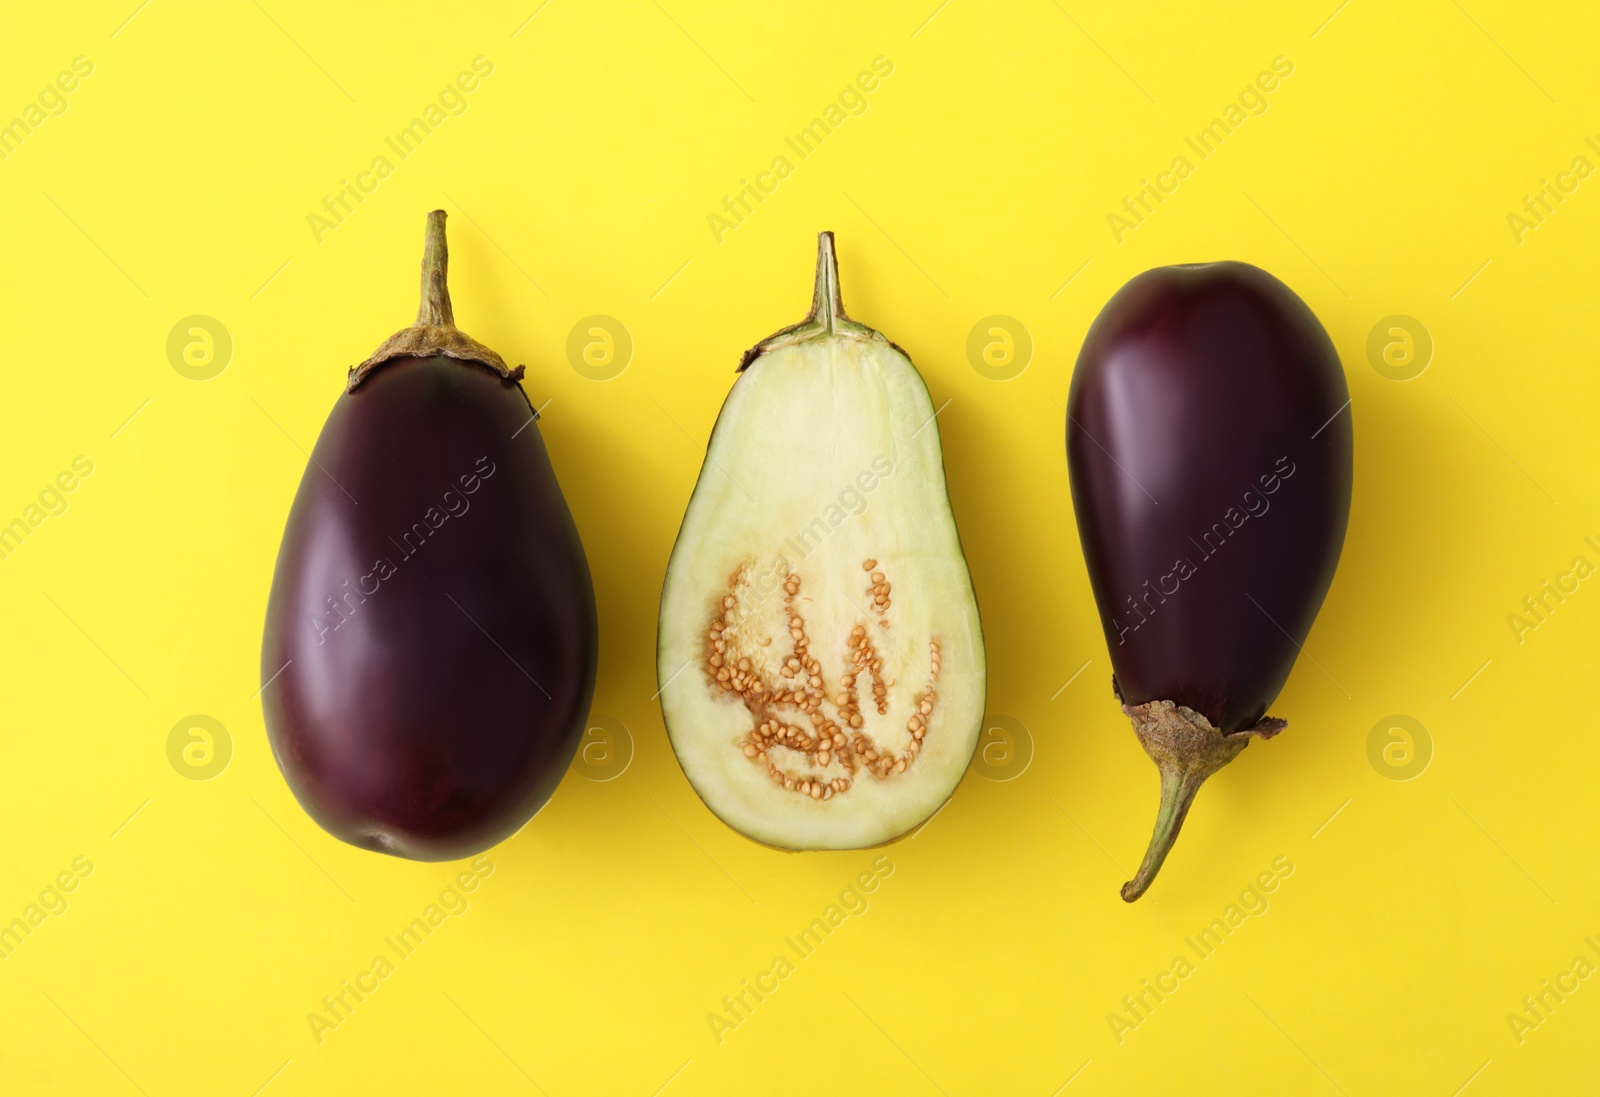 Photo of Cut and whole raw ripe eggplants on yellow background, flat lay